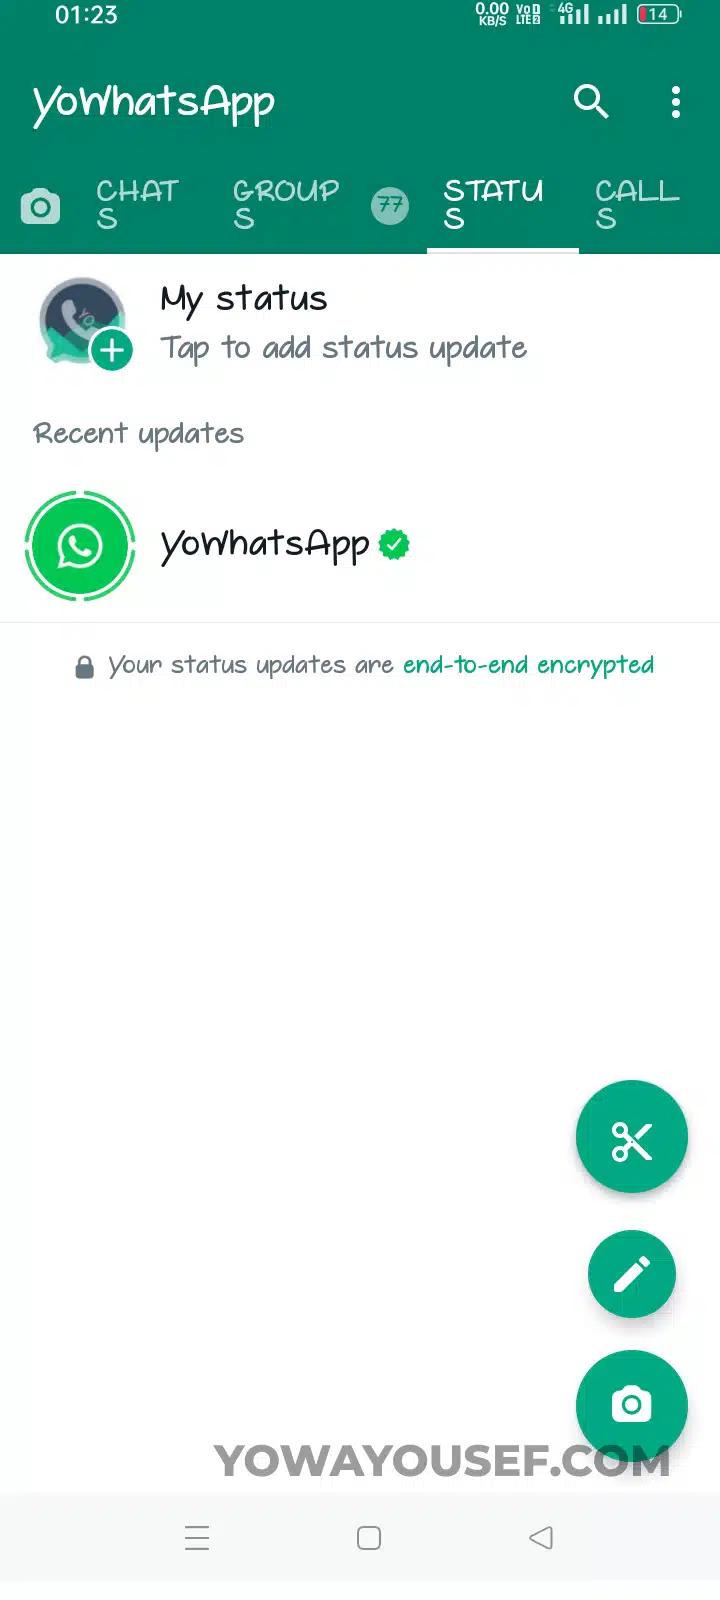 Changed Font Style in YoWhatsApp